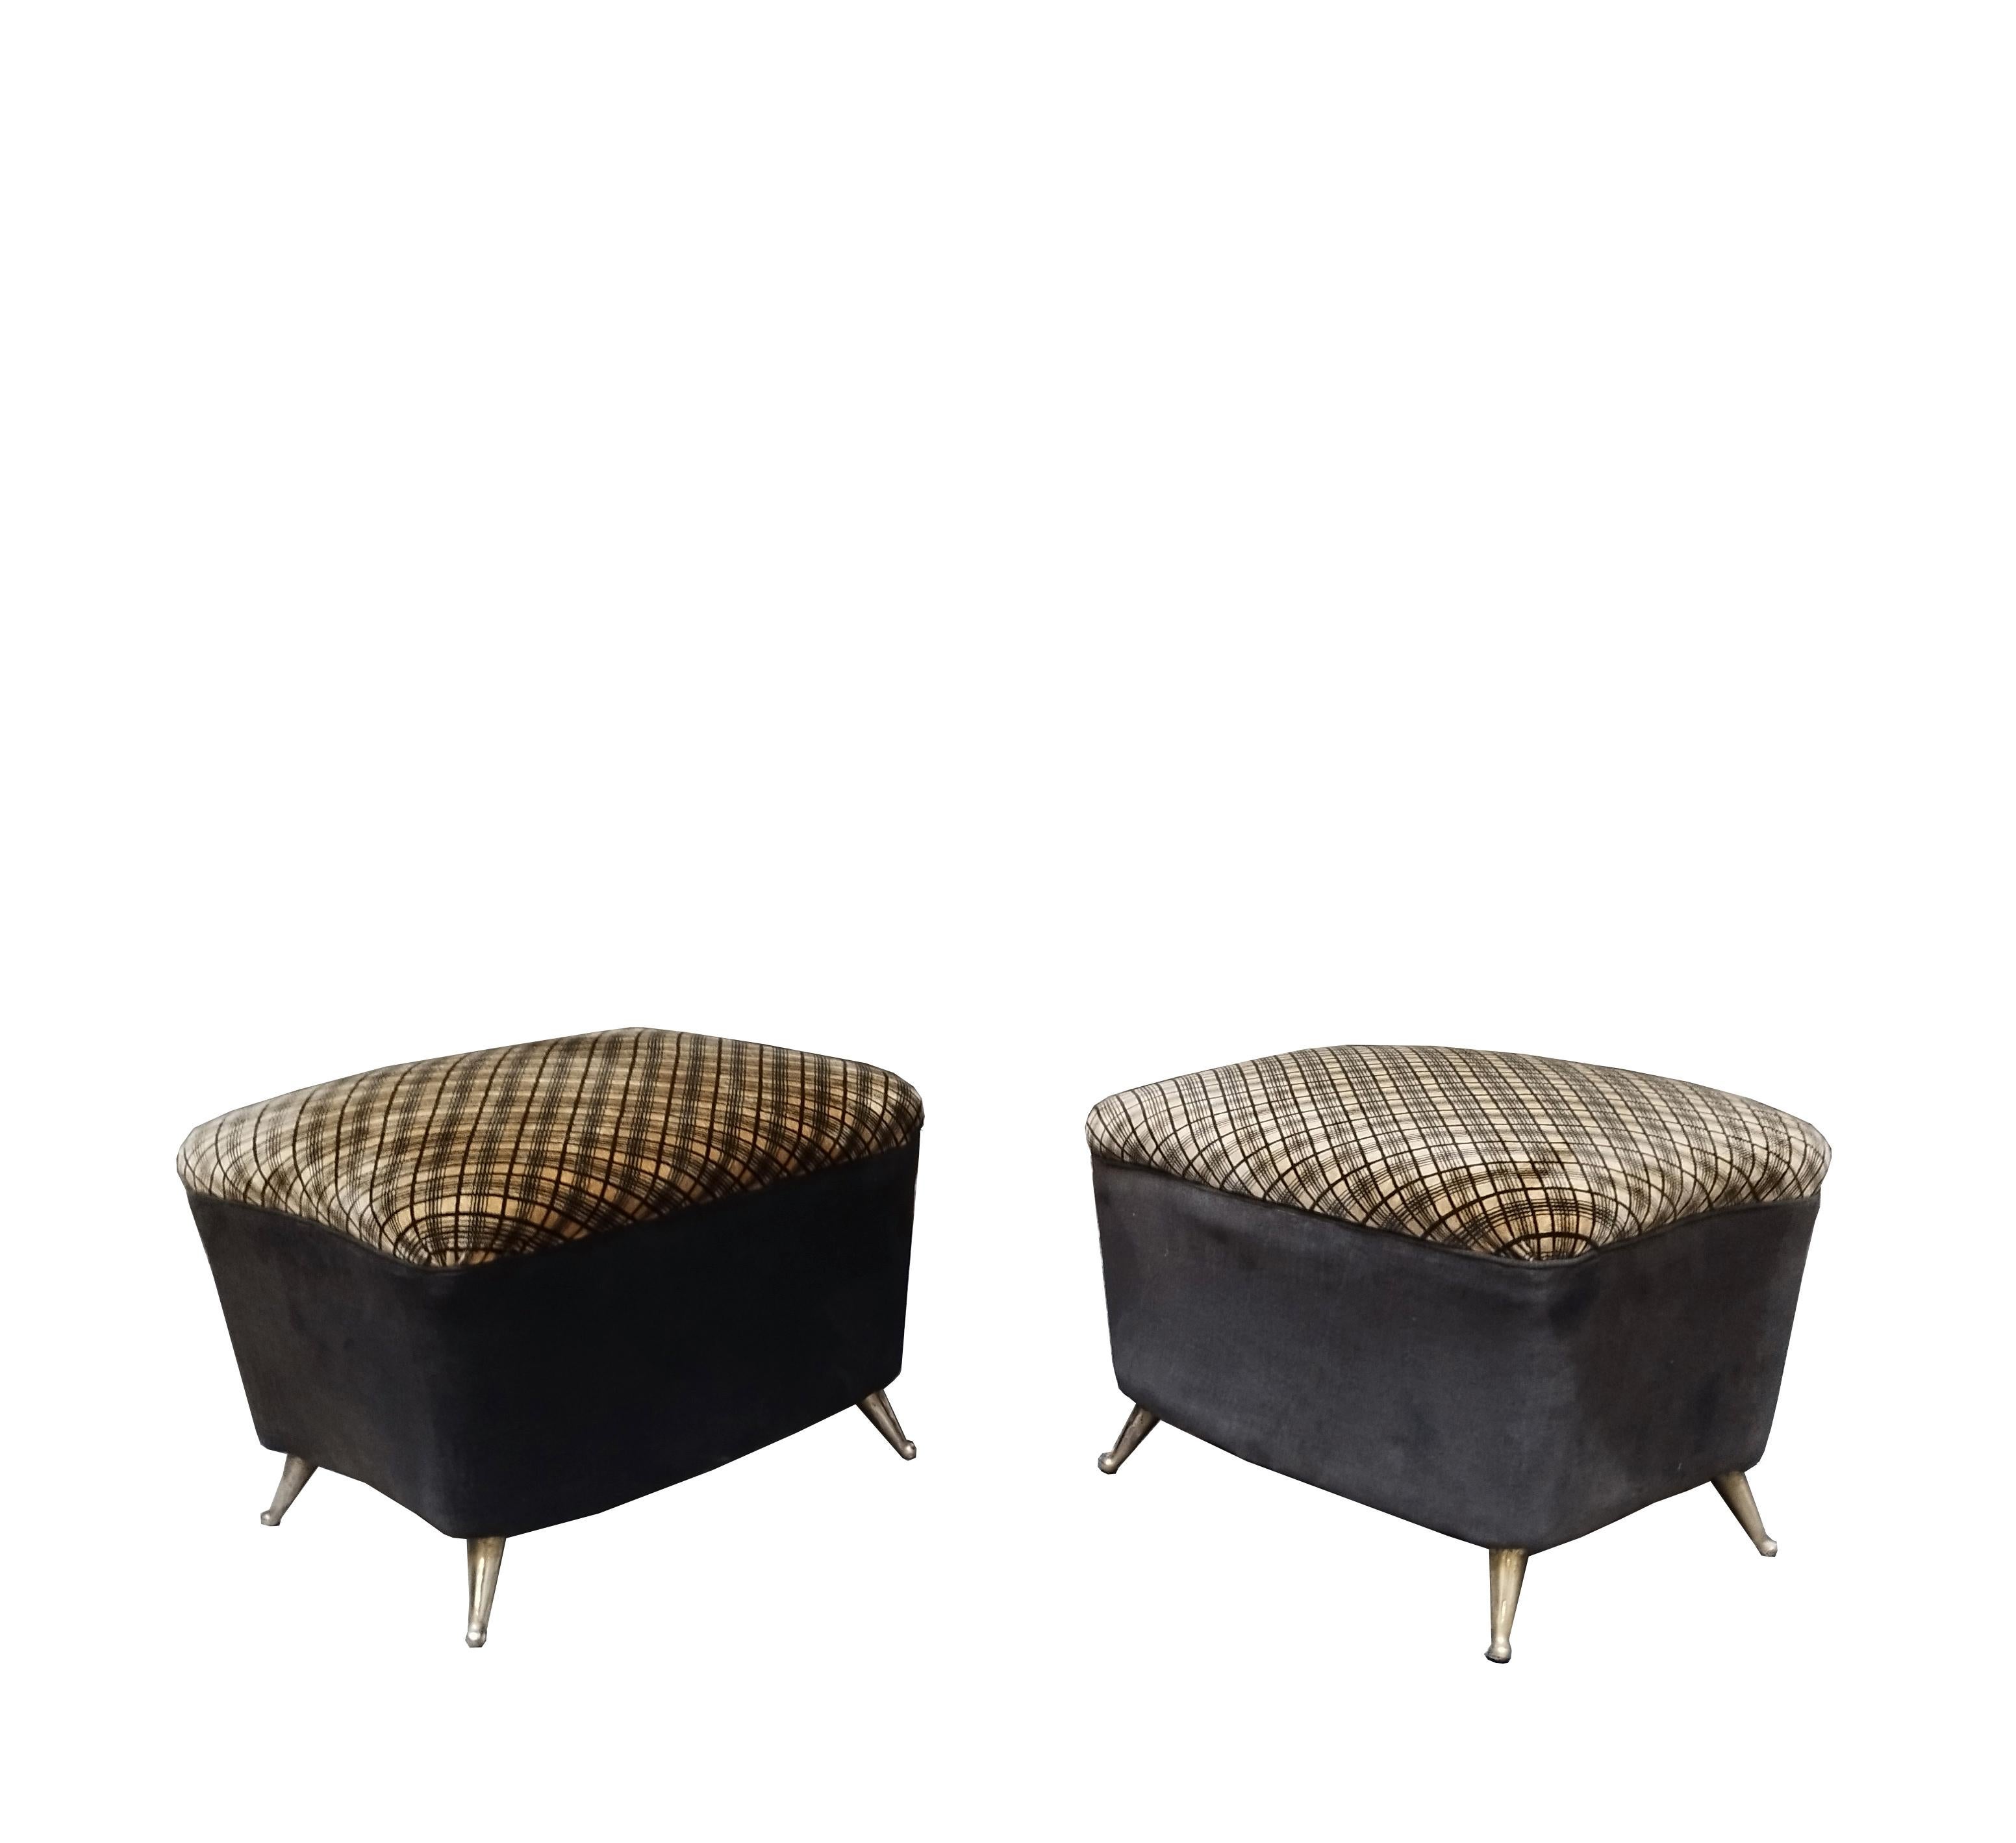 Italian ISA Bergamo Pair of Fabric and Brass Ottomans, Italy, 1950s For Sale